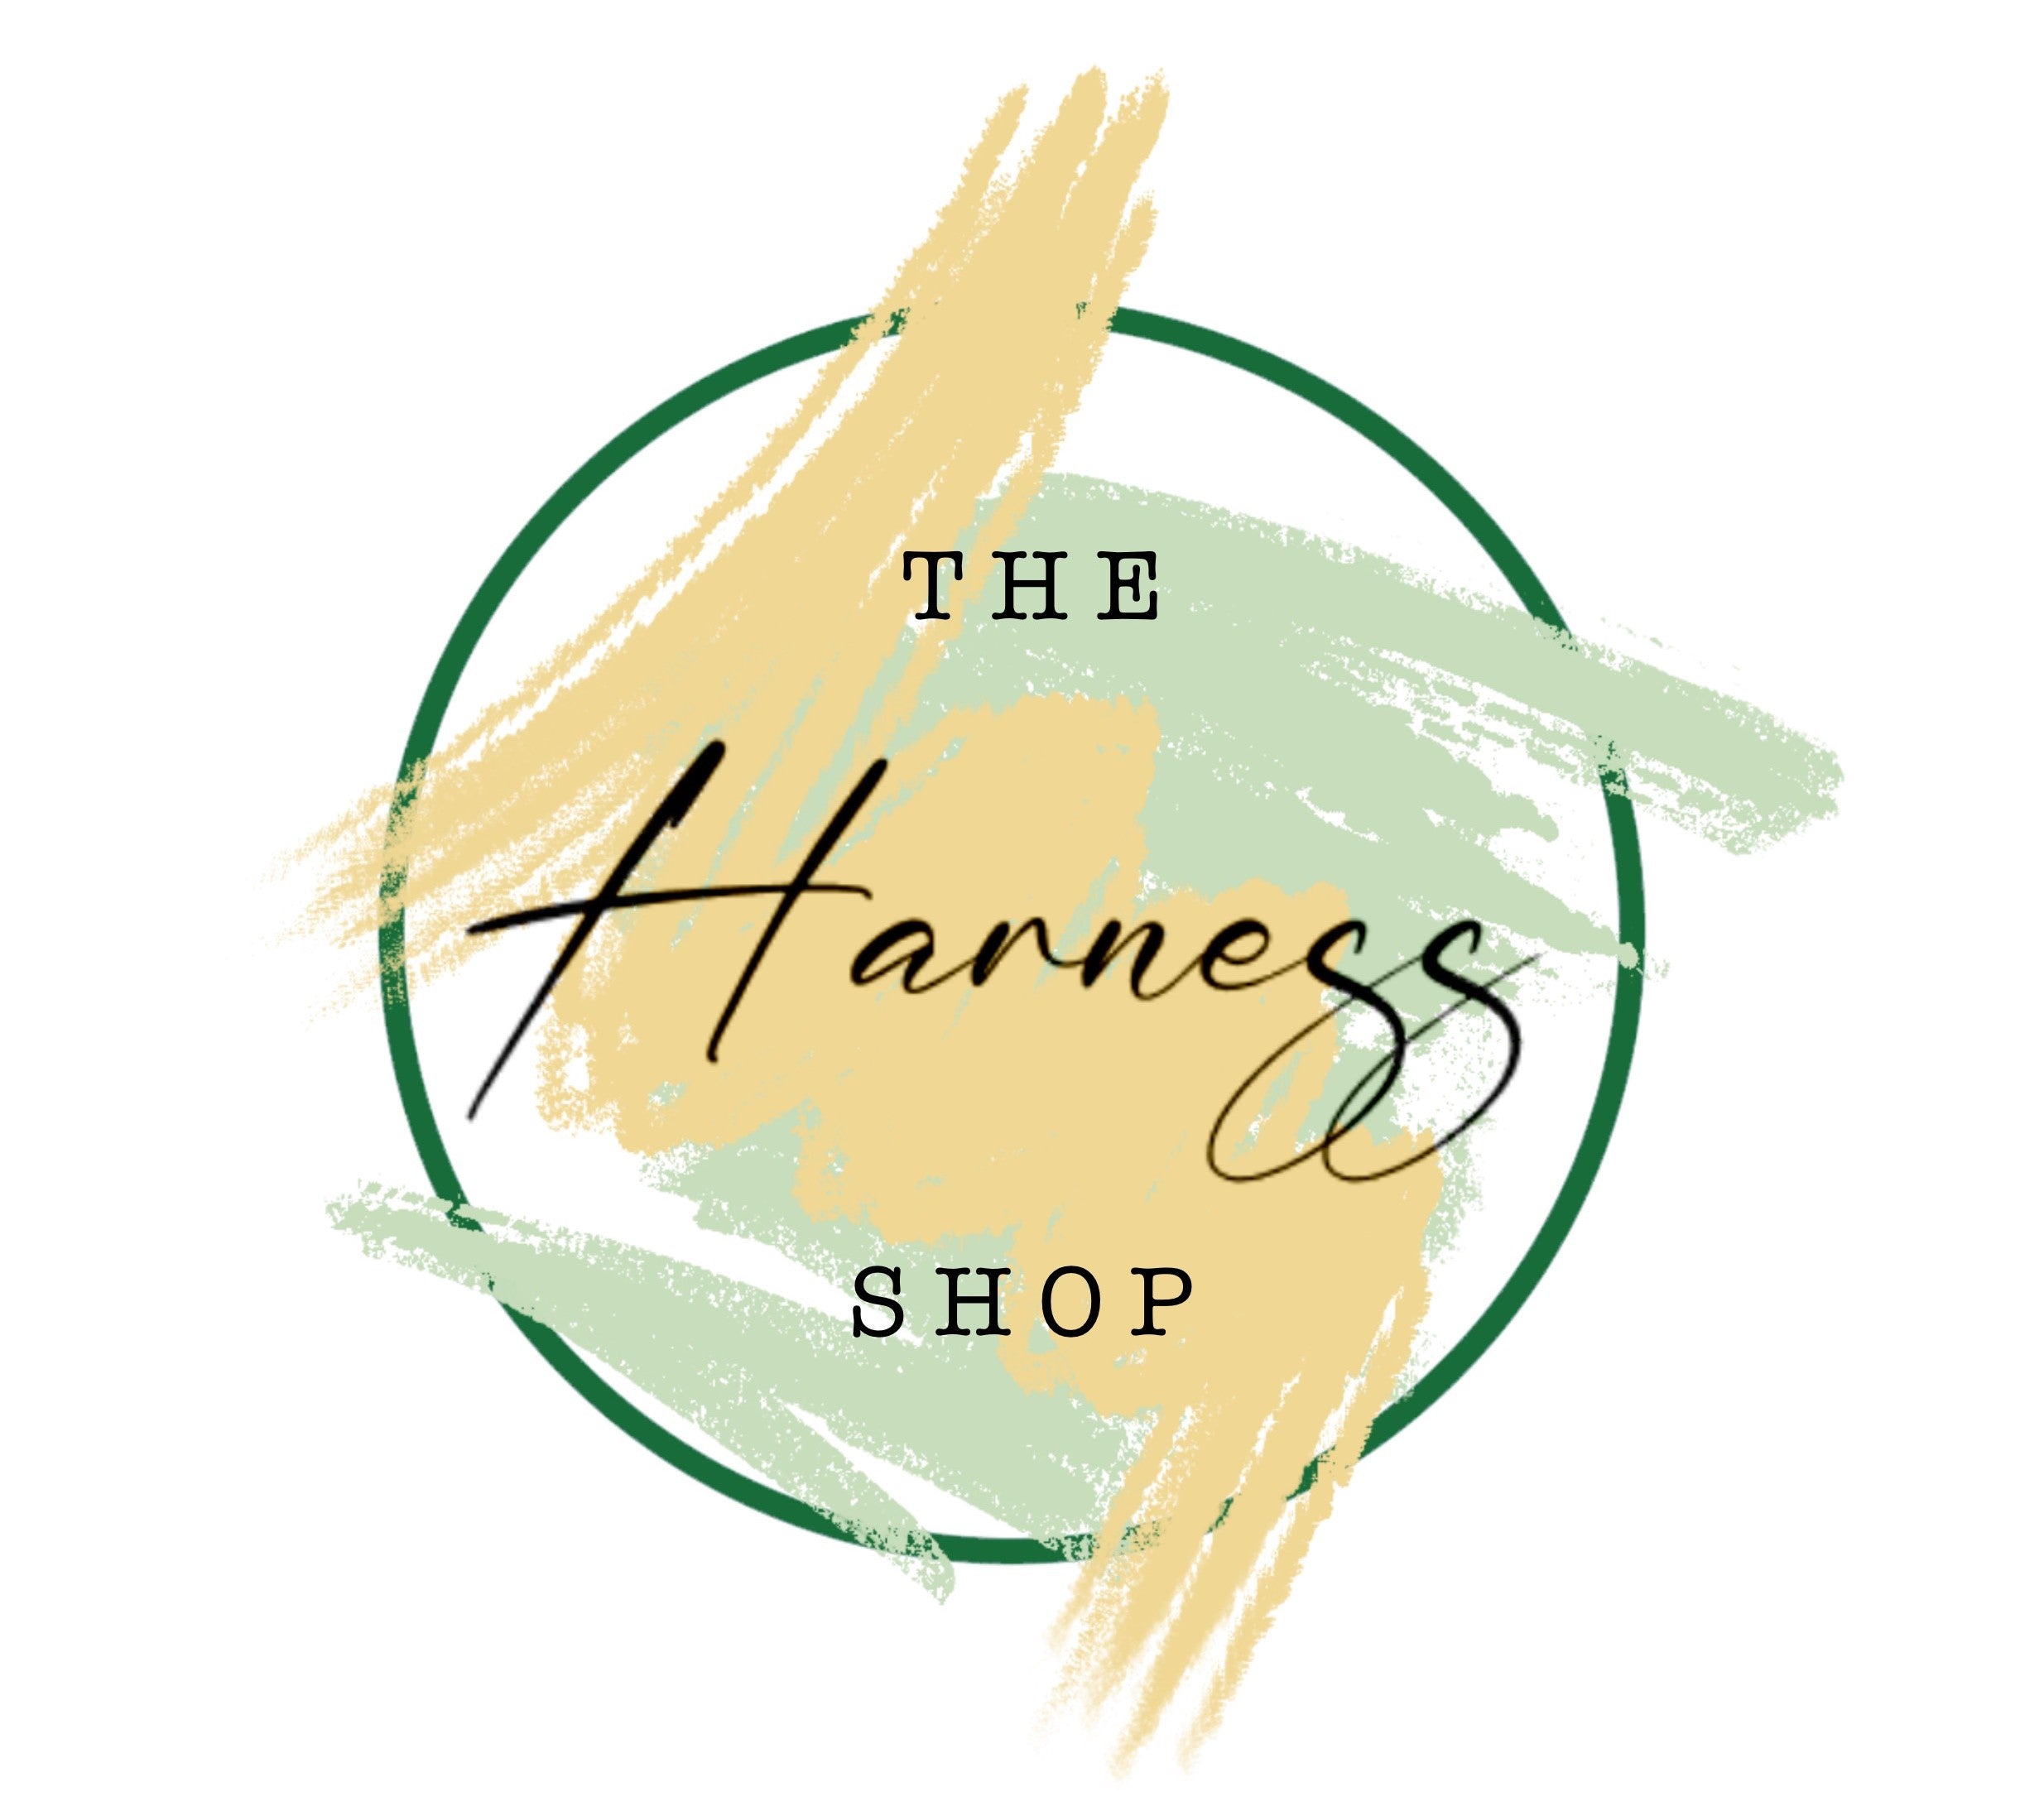 The Harness Shop